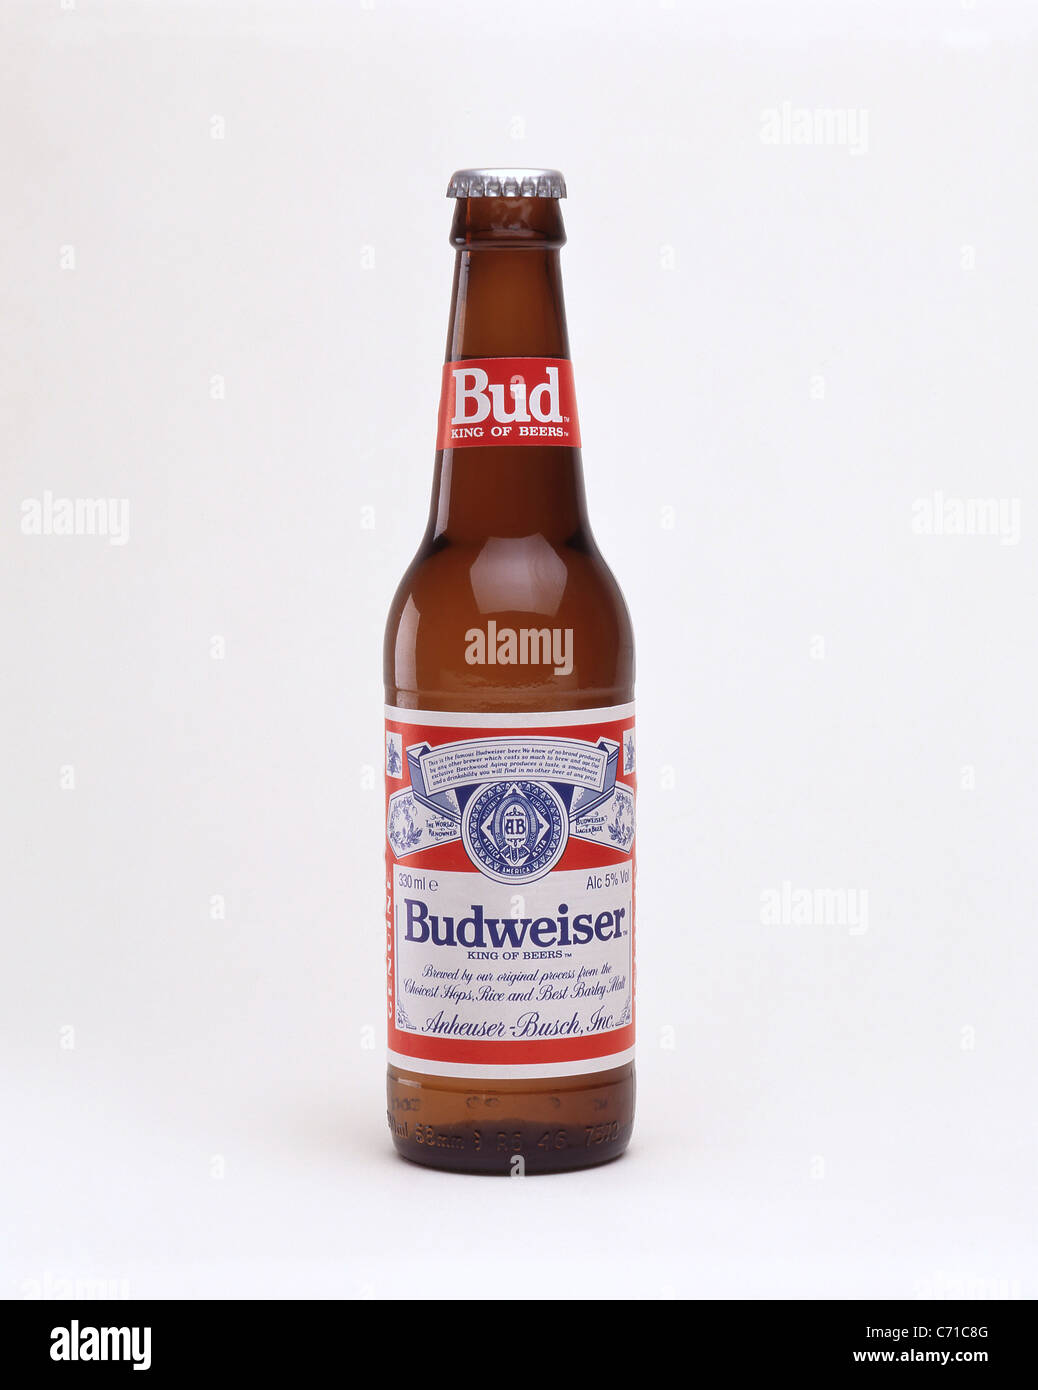 Bottle of Budweiser lager beer, United States of America Stock Photo